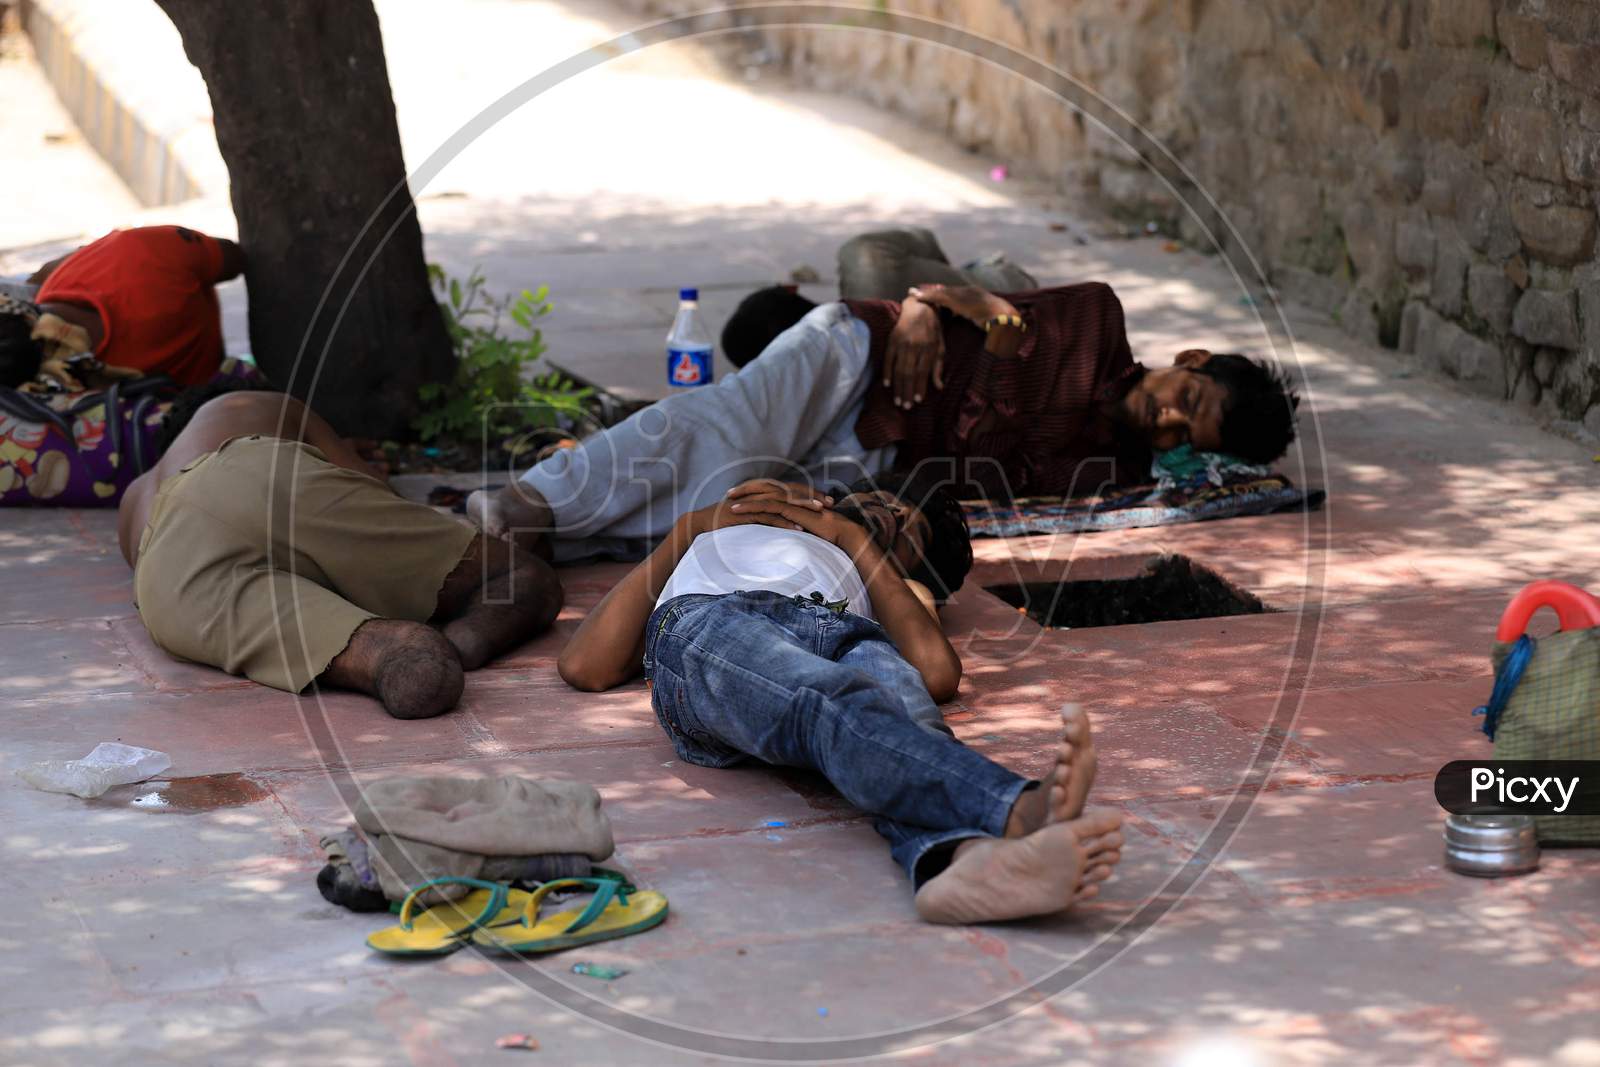 Homeless People Sleep On The Road Side On A Hot Day  In Prayagraj, May 26, 2020.